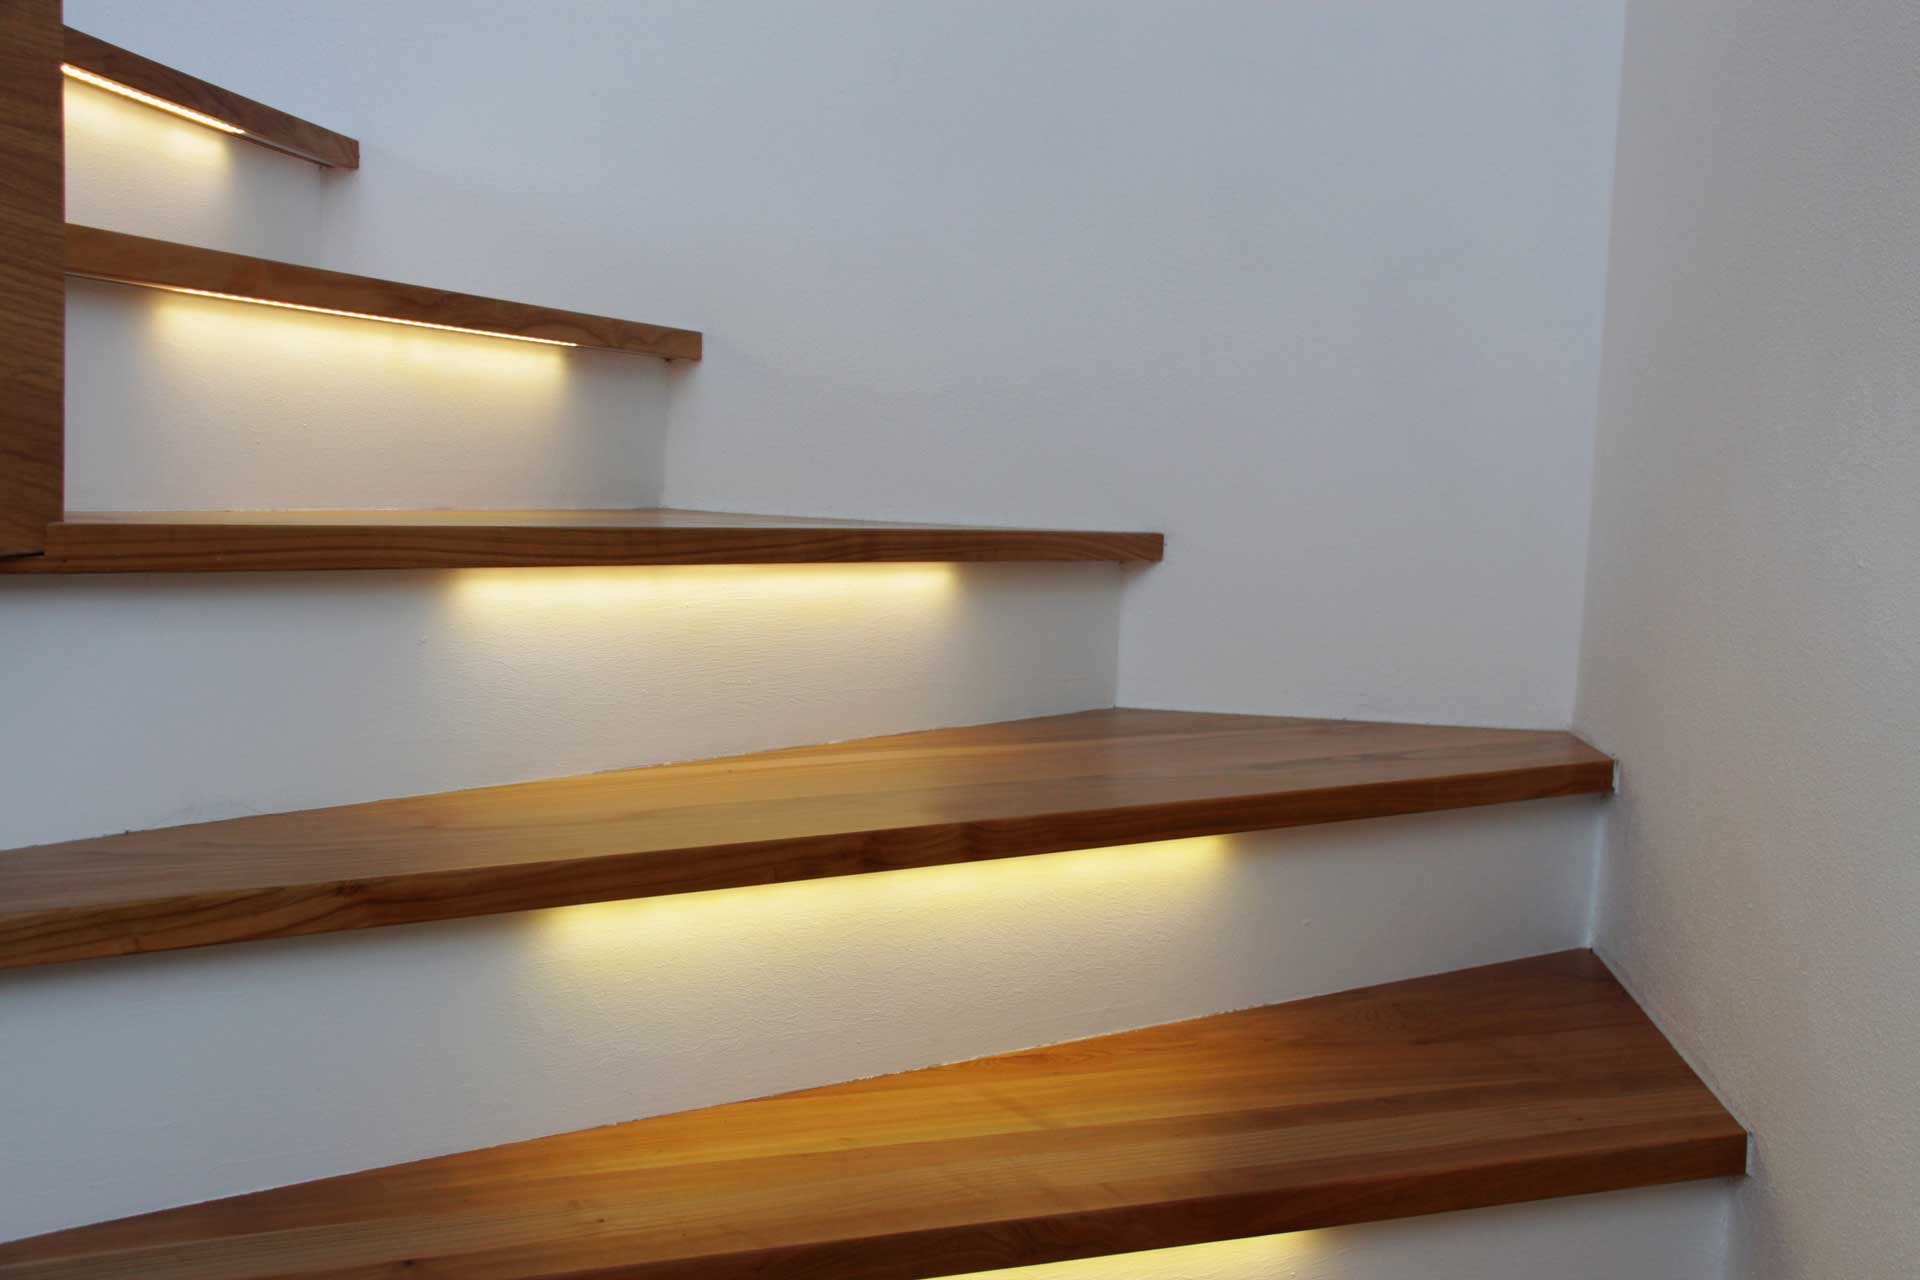 LED Lighting on Stairs